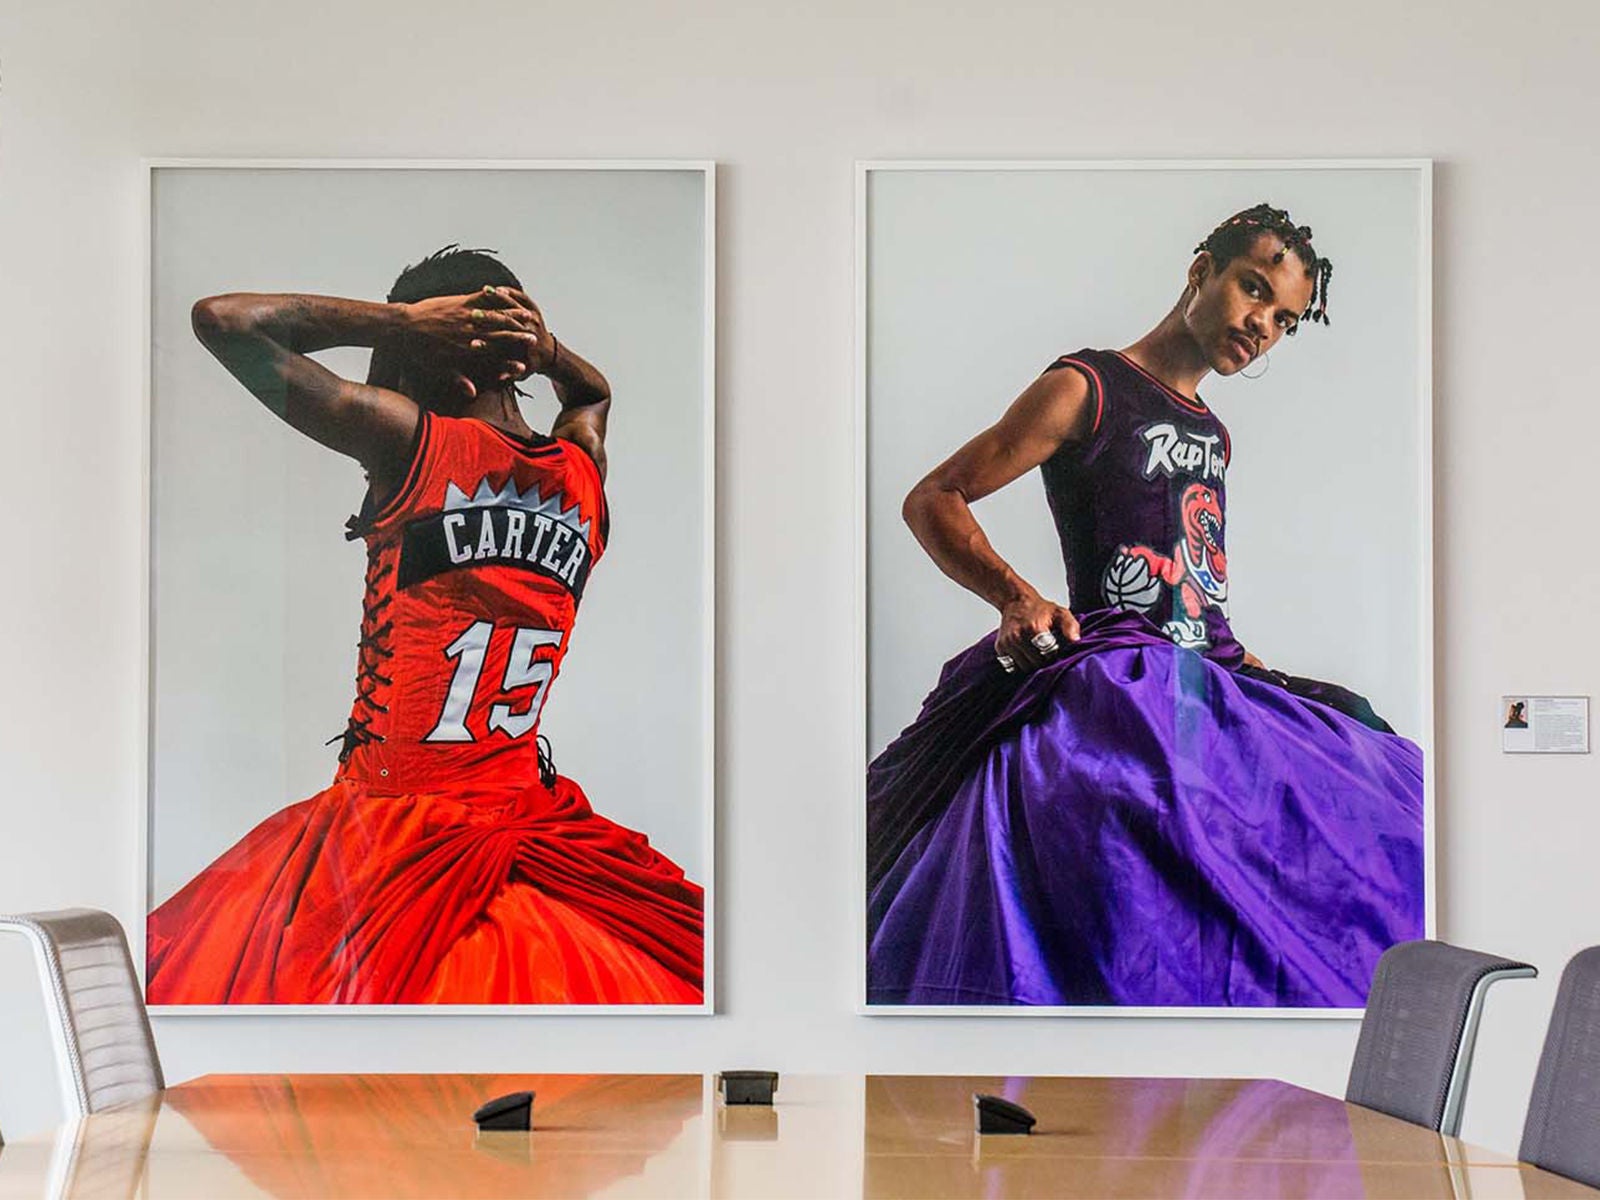 Two large Pride-themed portraits of Toronto Raptors players wearing gowns, in a Tangerine conference room.